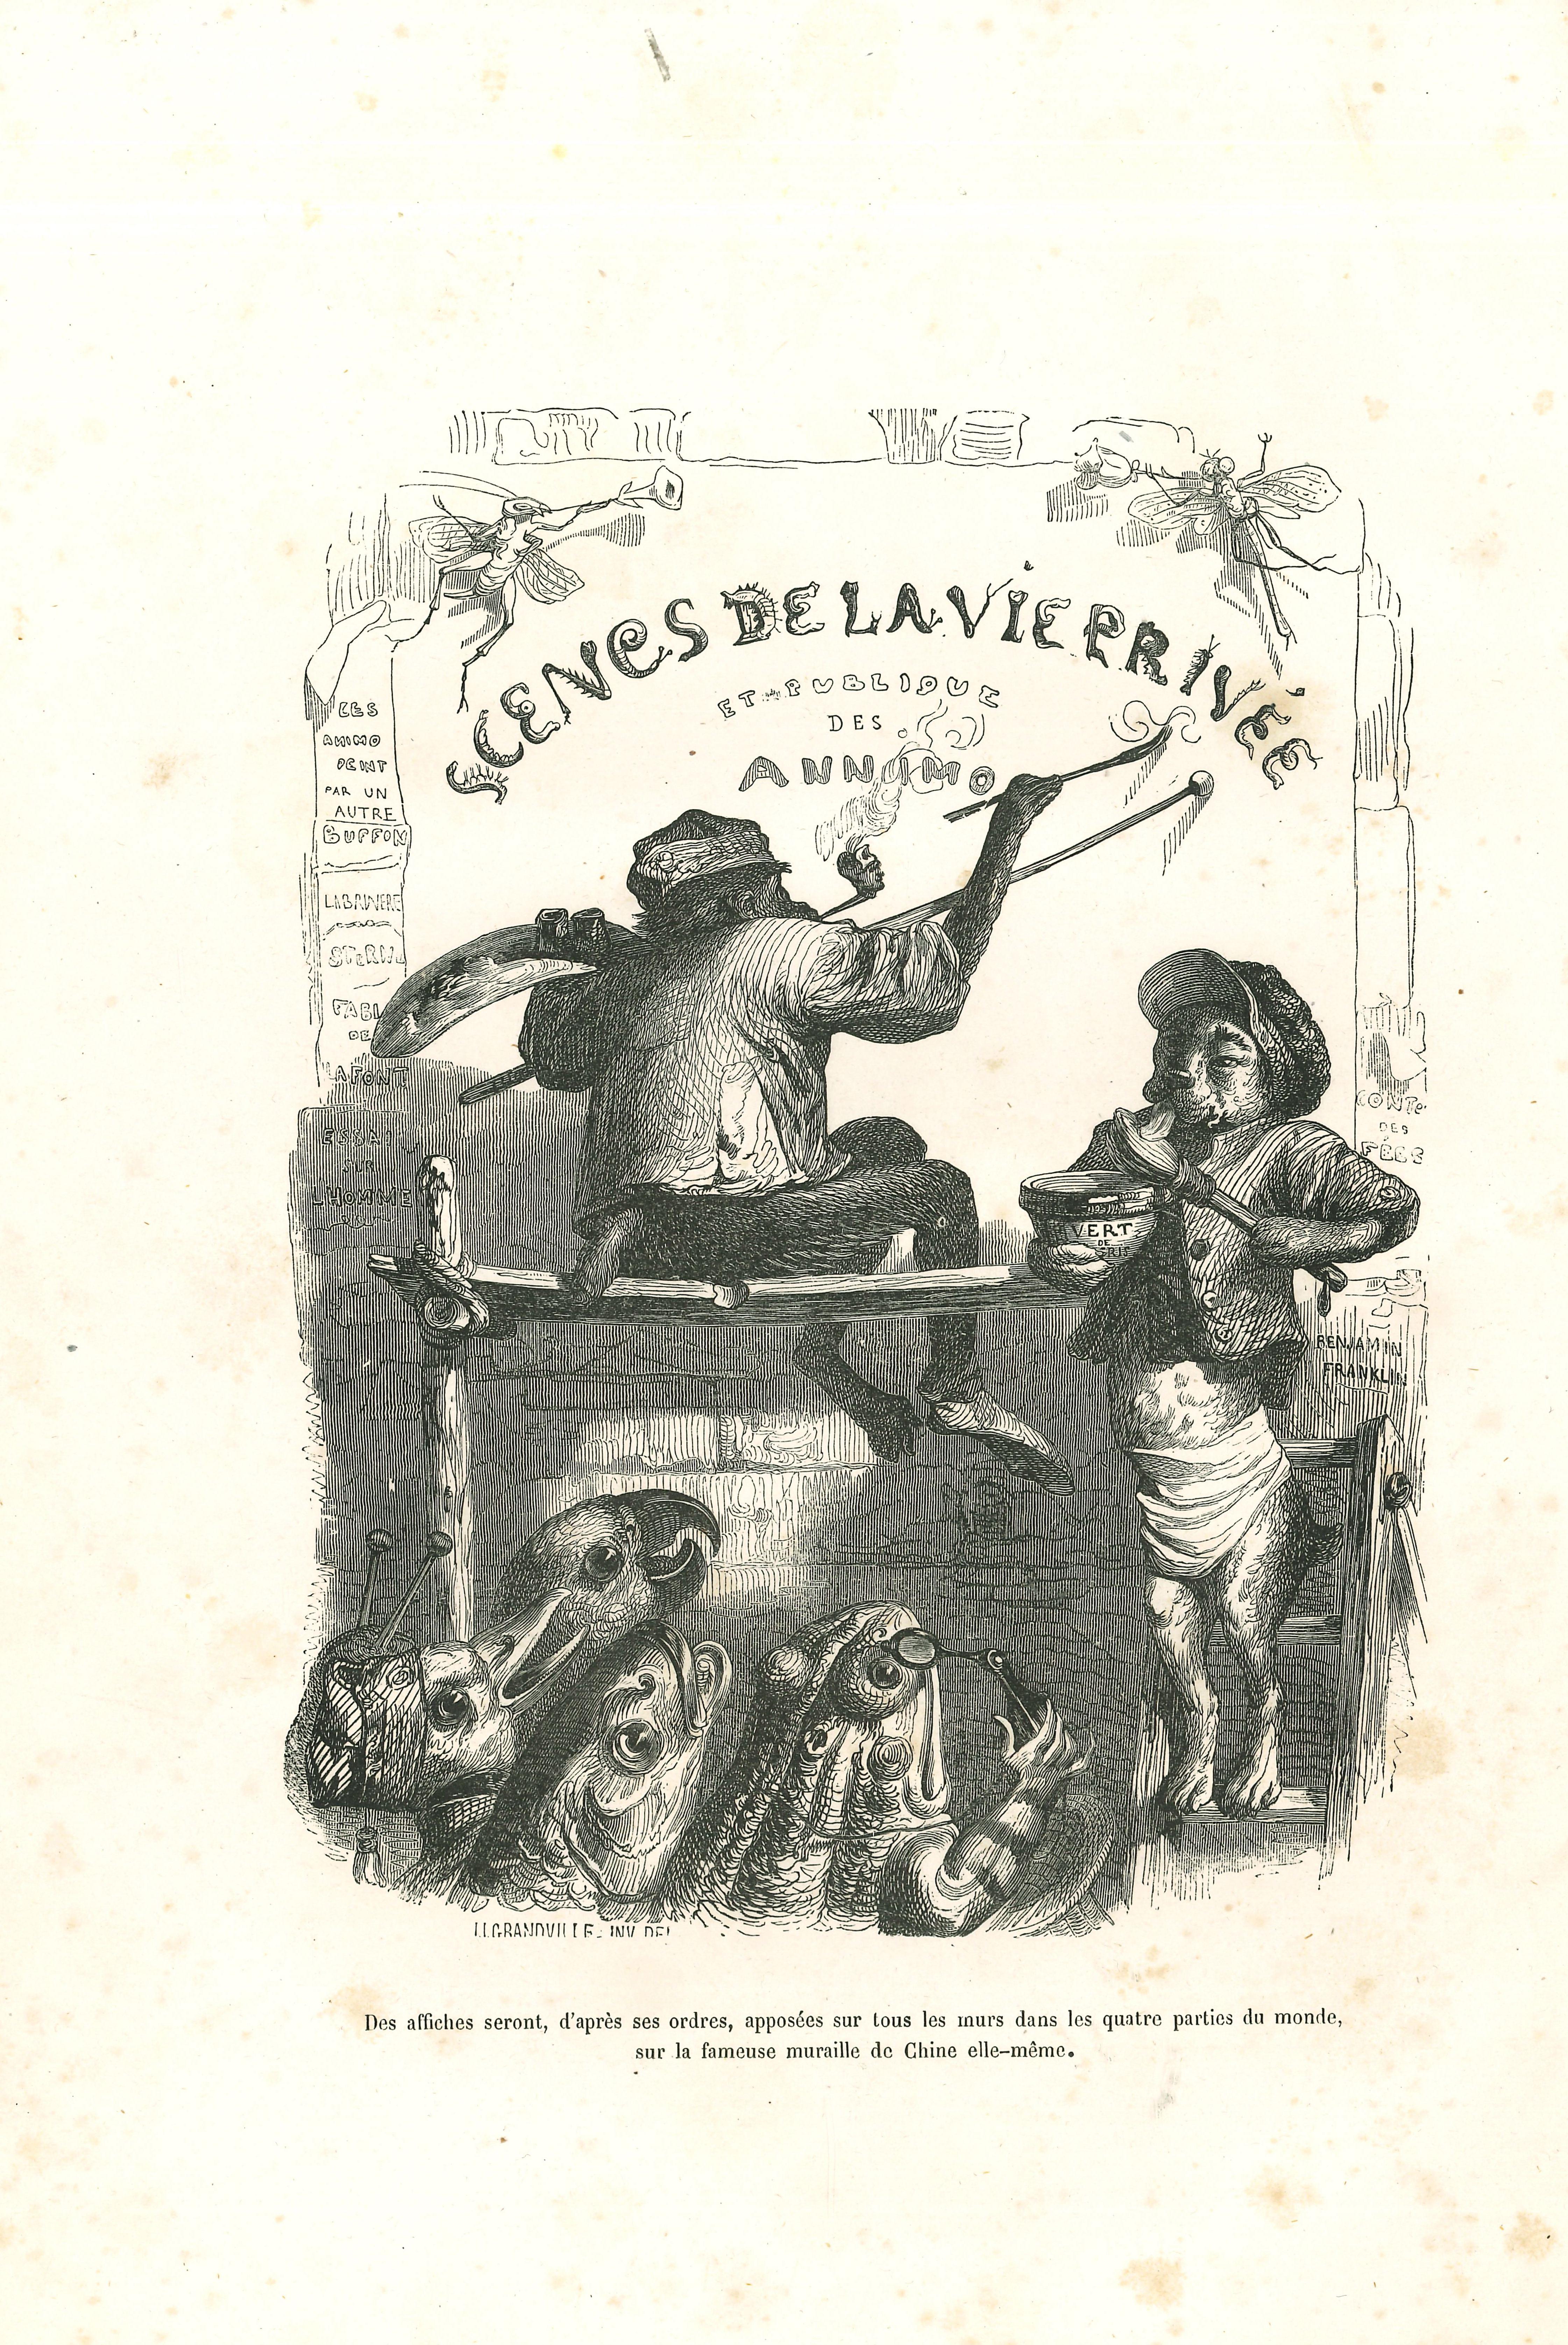 Announcement of Monkey Painter and Mr.Dog, His Assistant by J.J Grandville-1852